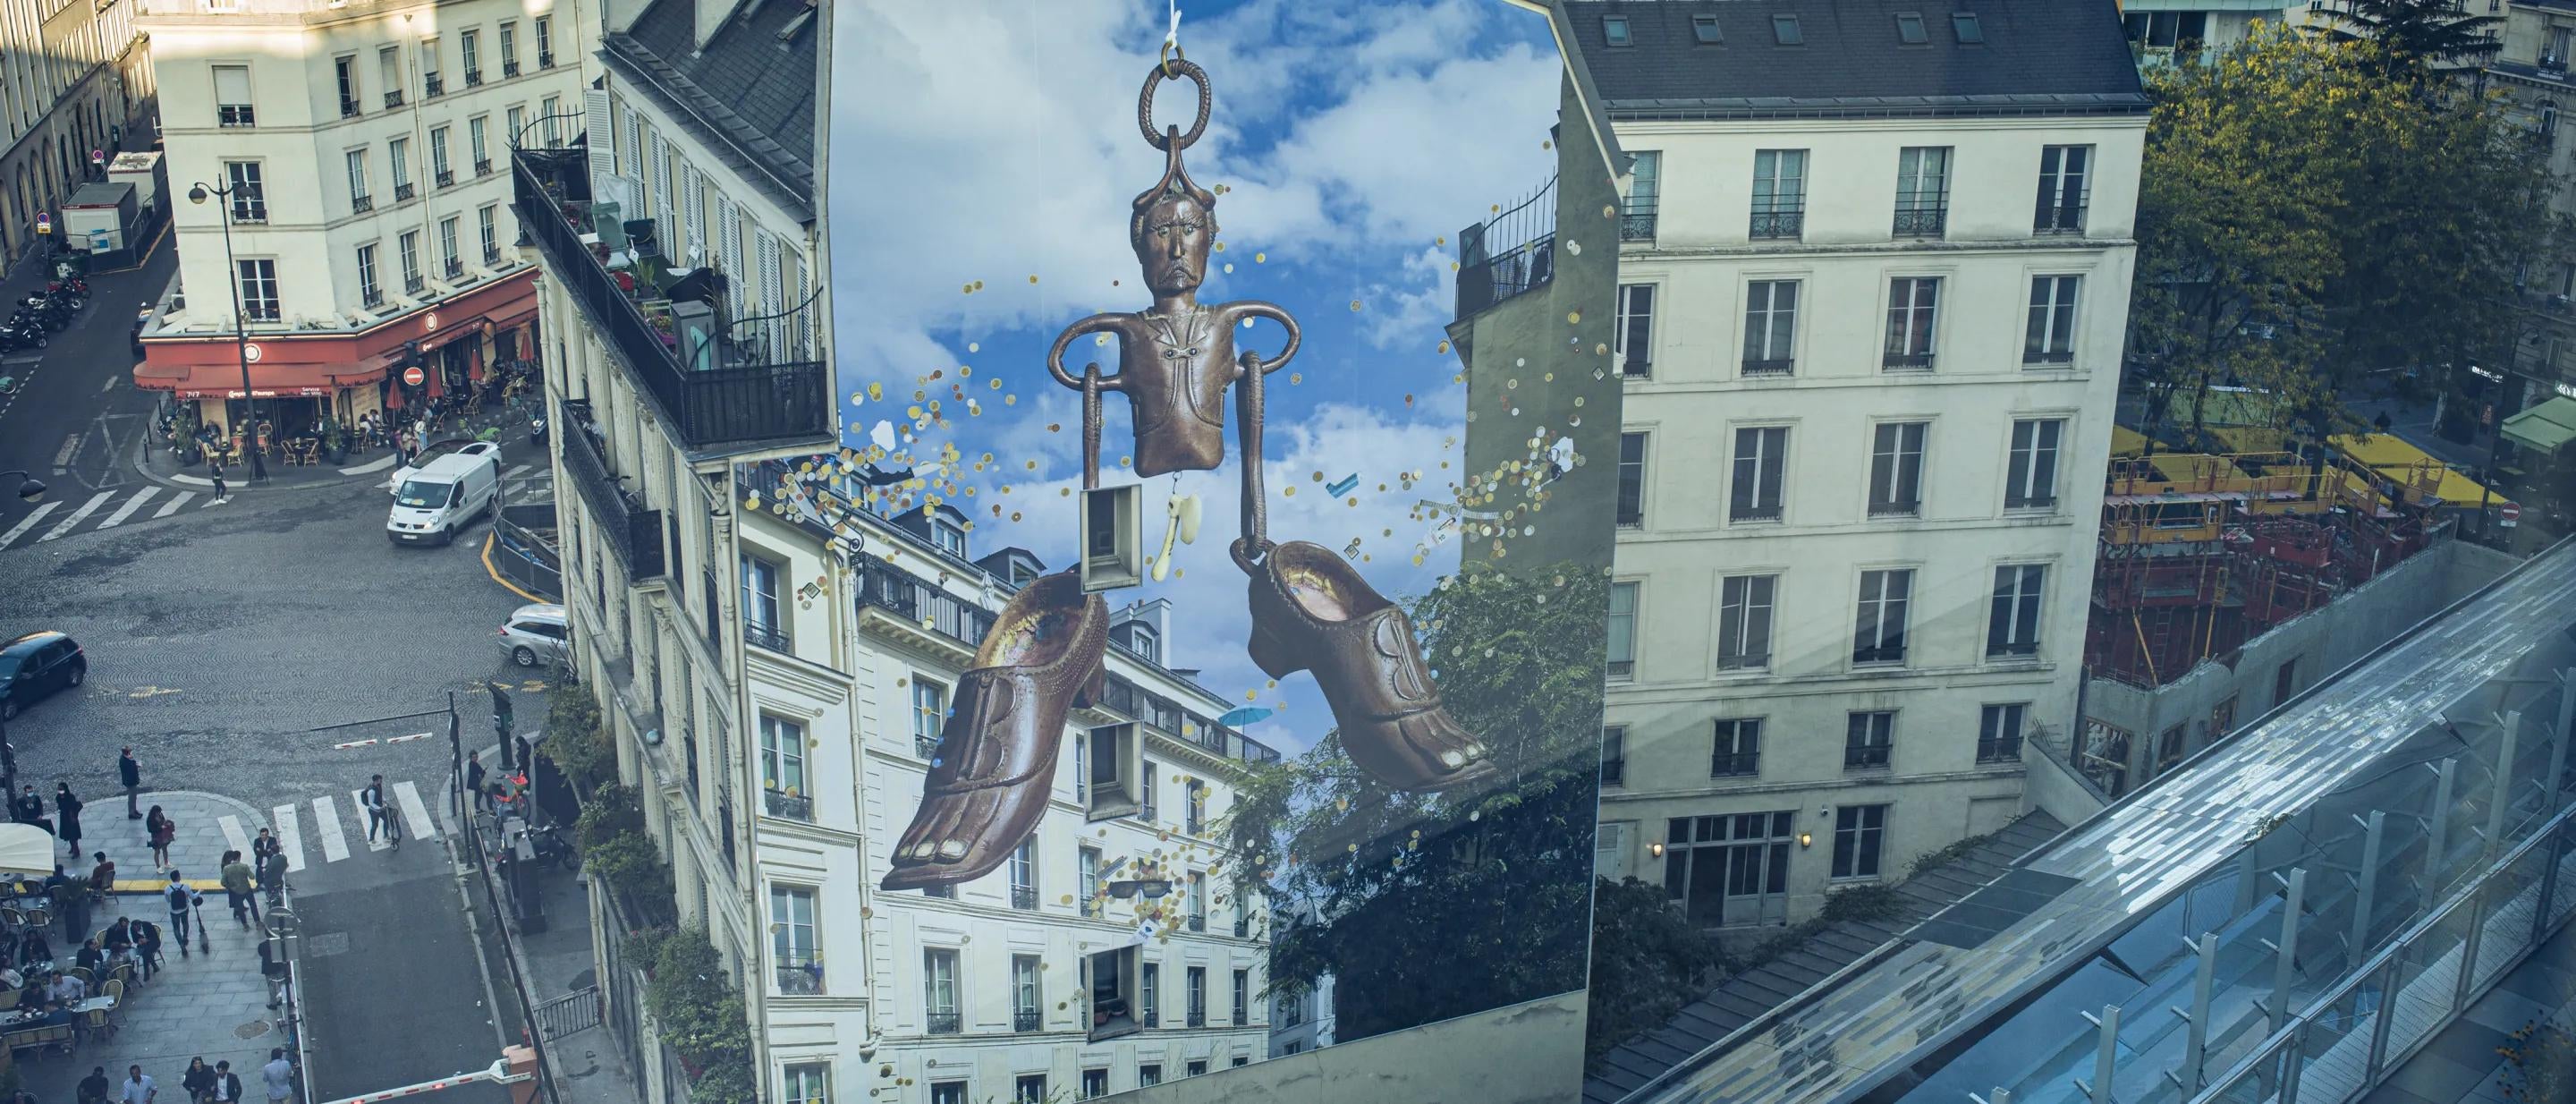 Mural on side of building with Parisian buildings surrounding